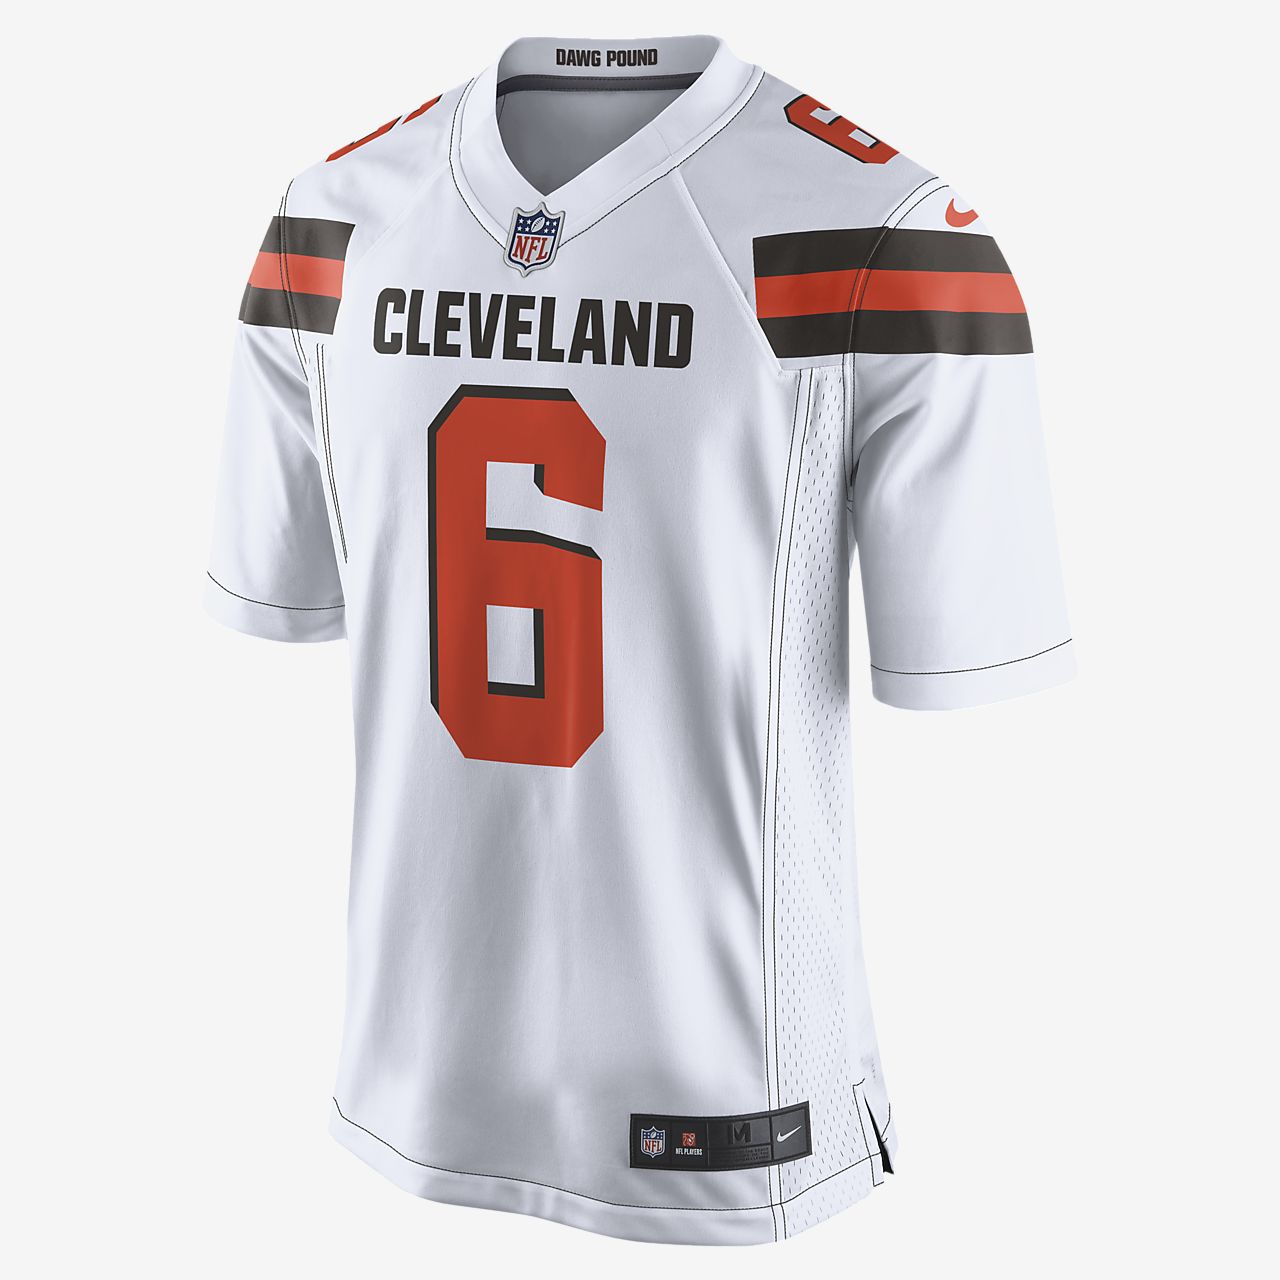 cleveland browns training jersey